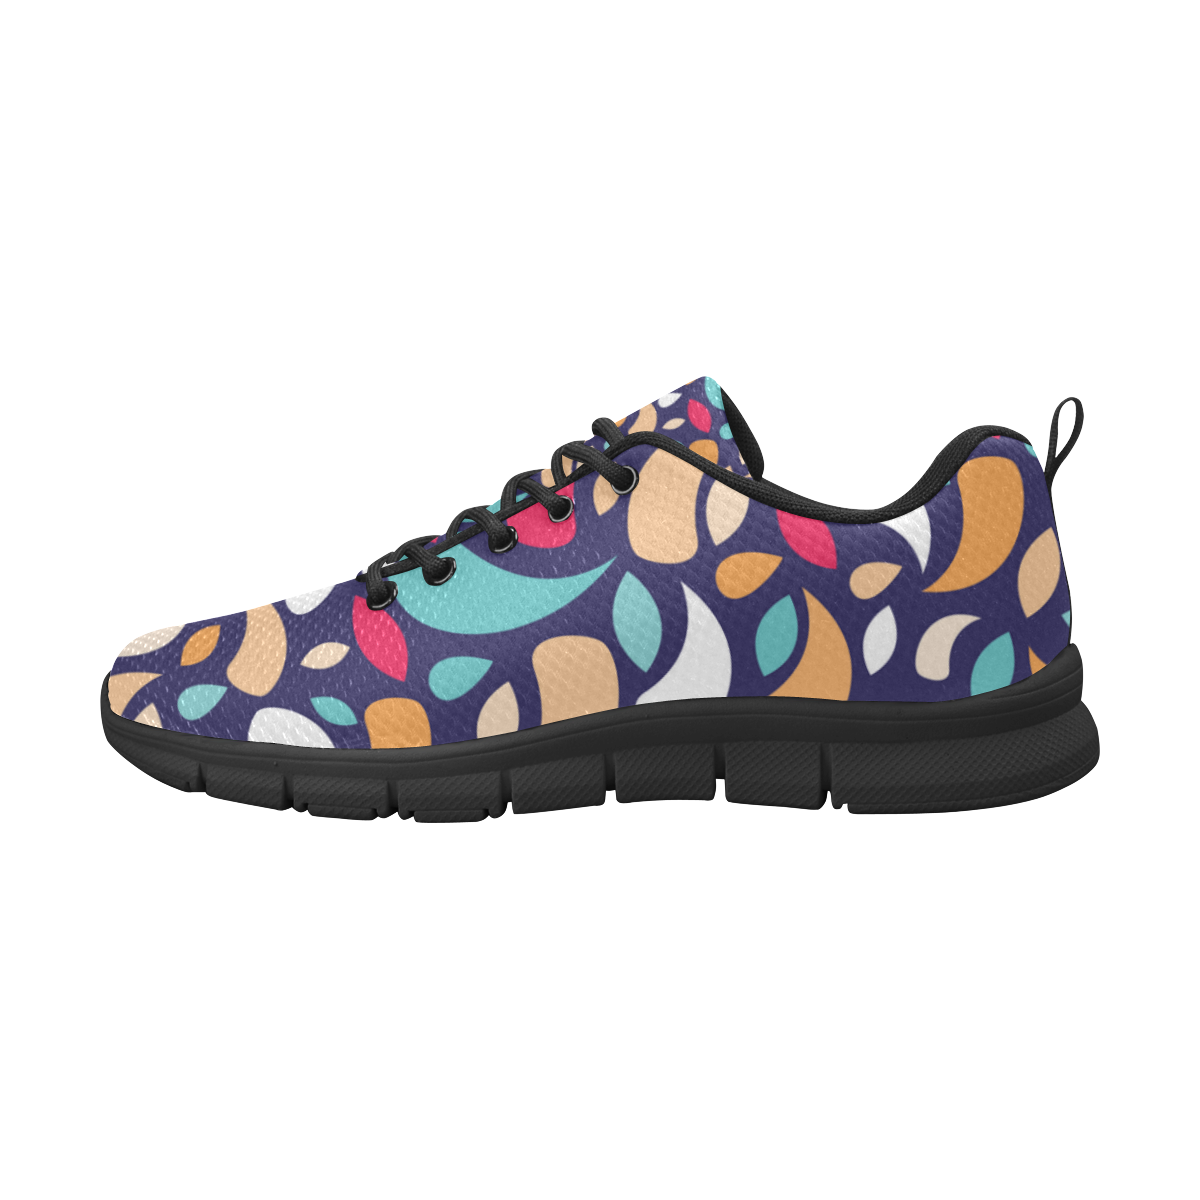 Multicolor Leaves And Geometric Shapes Women's Breathable Running Shoes (Model 055)